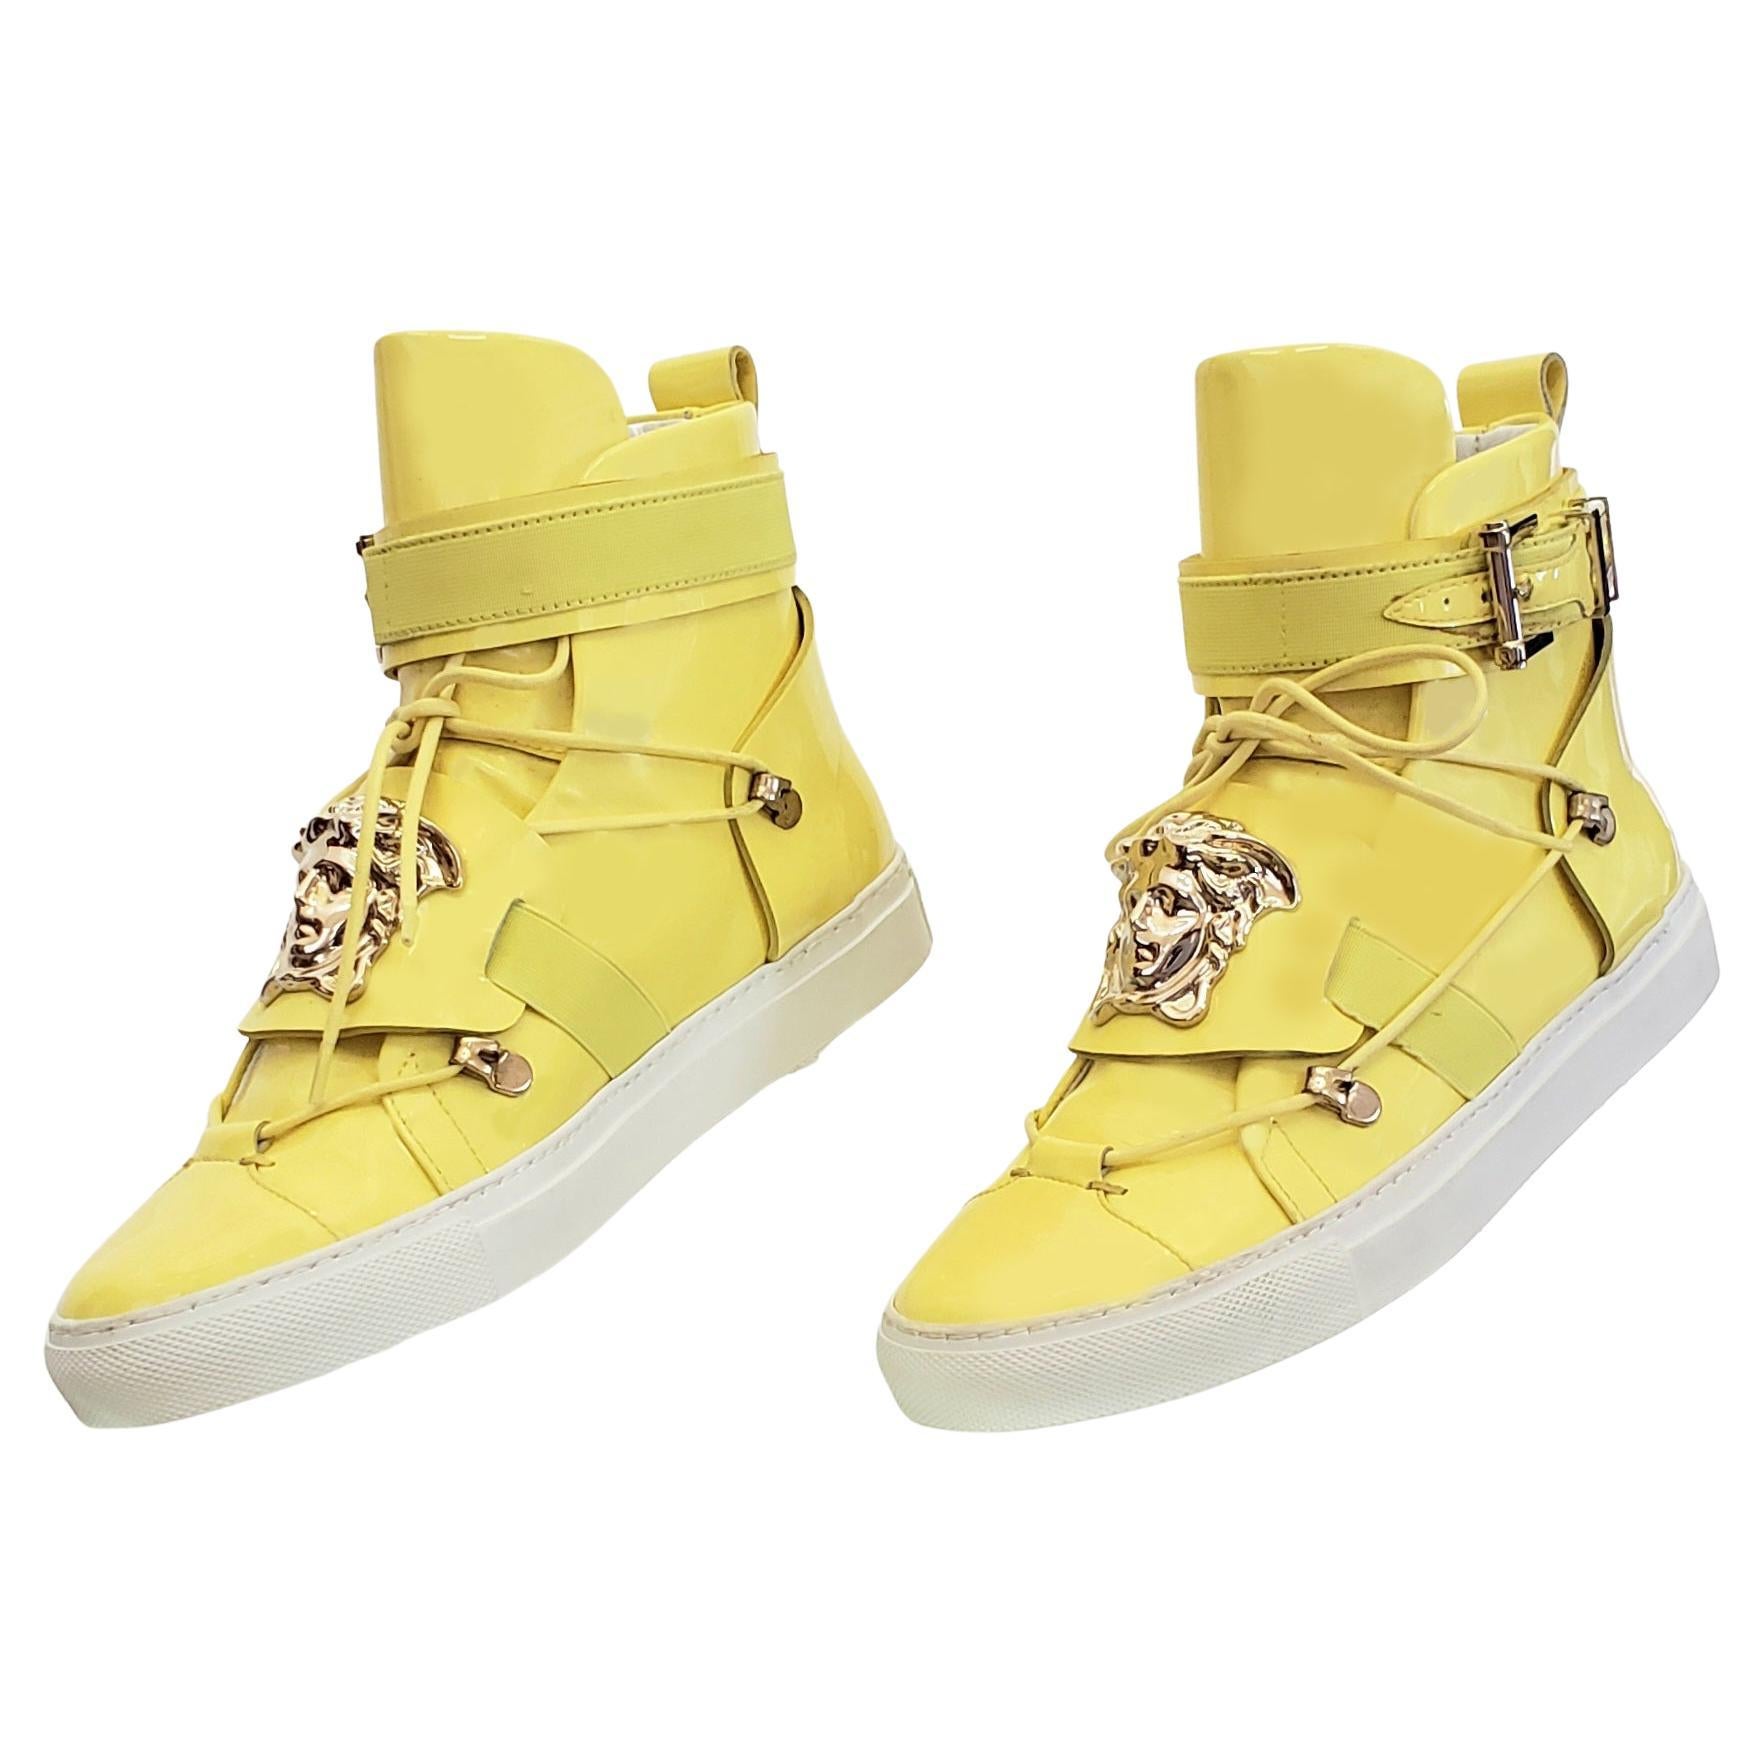 NEW VERSACE YELLOW PATENT LEATHER SNEAKERS w/ GOLD 3D MEDUSA HEAD 36 - 6